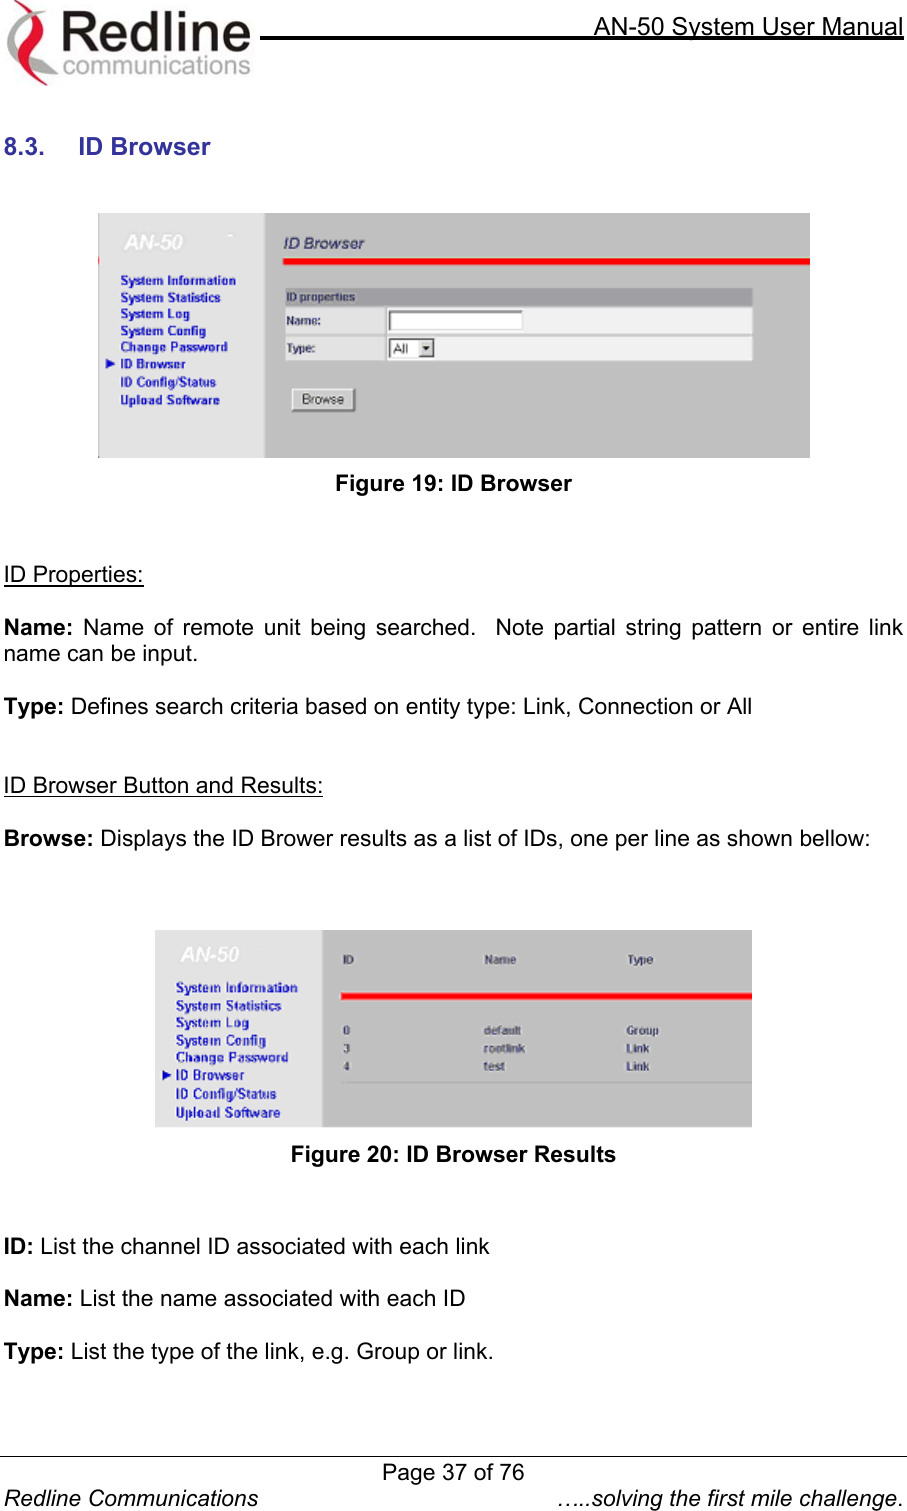     AN-50 System User Manual  Redline Communications  …..solving the first mile challenge.  8.3. ID Browser    Figure 19: ID Browser   ID Properties:  Name: Name of remote unit being searched.  Note partial string pattern or entire link name can be input.  Type: Defines search criteria based on entity type: Link, Connection or All   ID Browser Button and Results:  Browse: Displays the ID Brower results as a list of IDs, one per line as shown bellow:     Figure 20: ID Browser Results   ID: List the channel ID associated with each link  Name: List the name associated with each ID  Type: List the type of the link, e.g. Group or link. Page 37 of 76